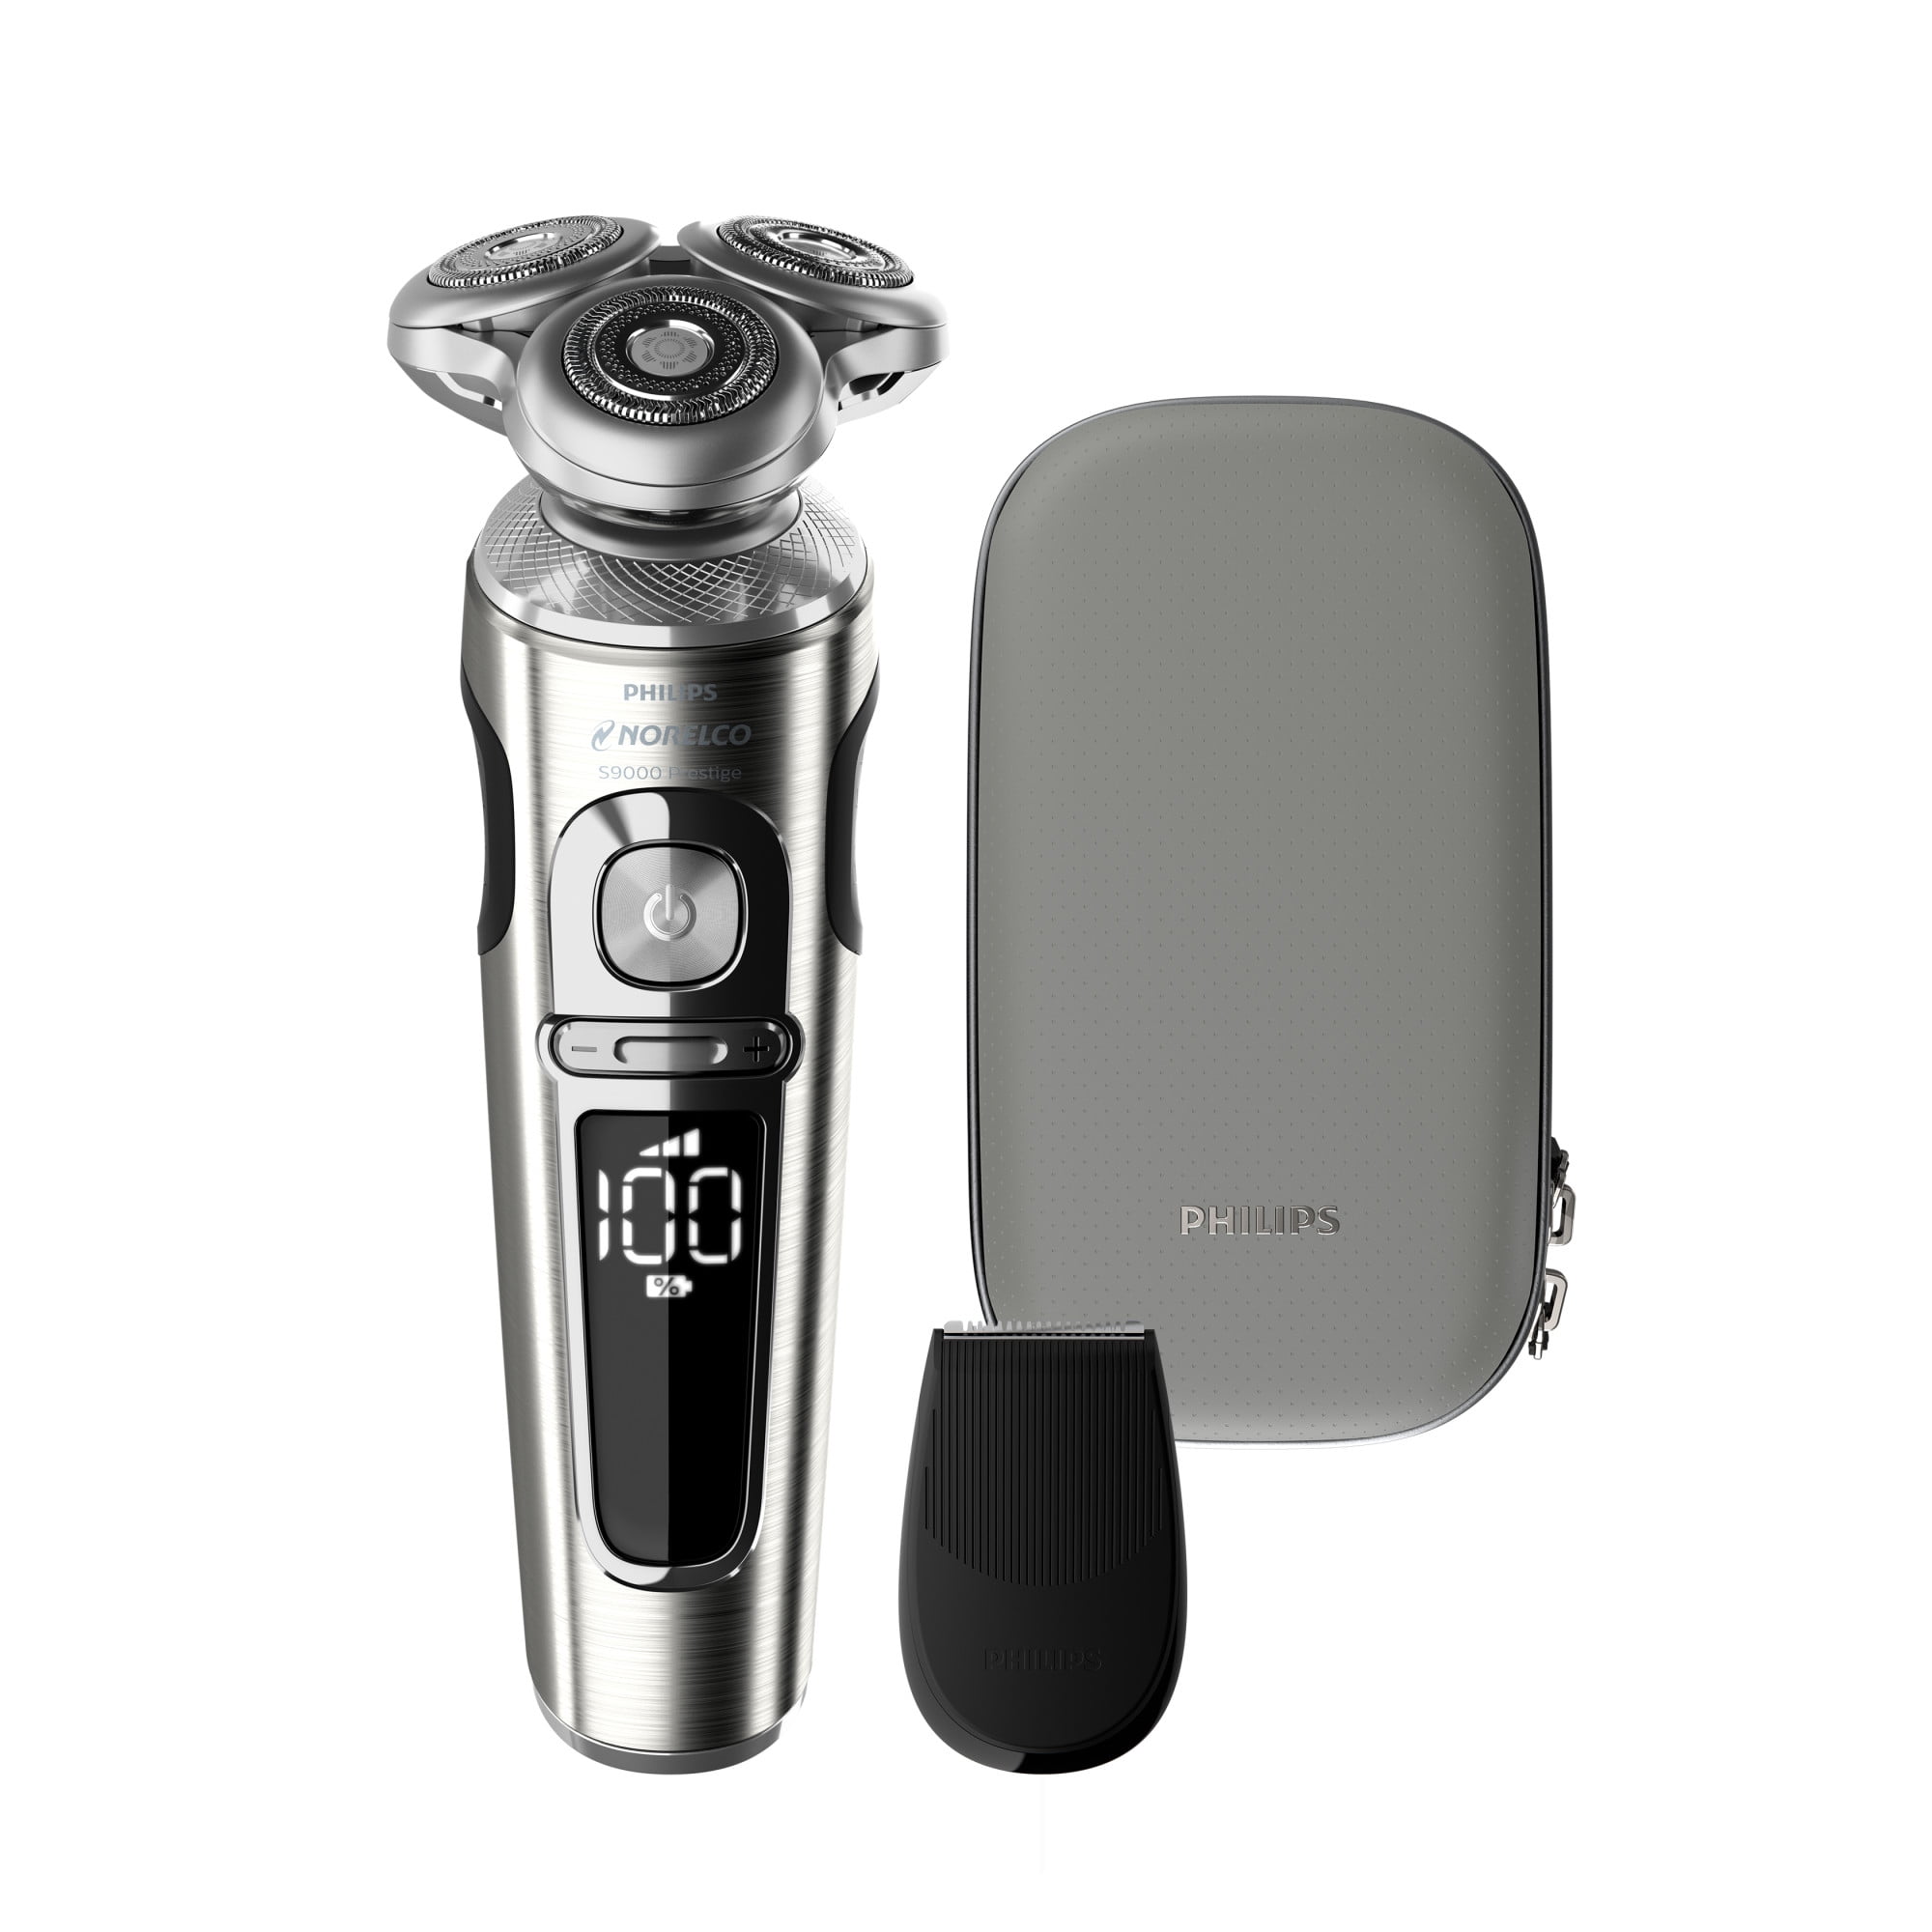 Philips Norelco S9000 Prestige Rechargeable Wet & Dry Shaver with Trimmer and Premium Case, SP9820/87 - Walmart.com